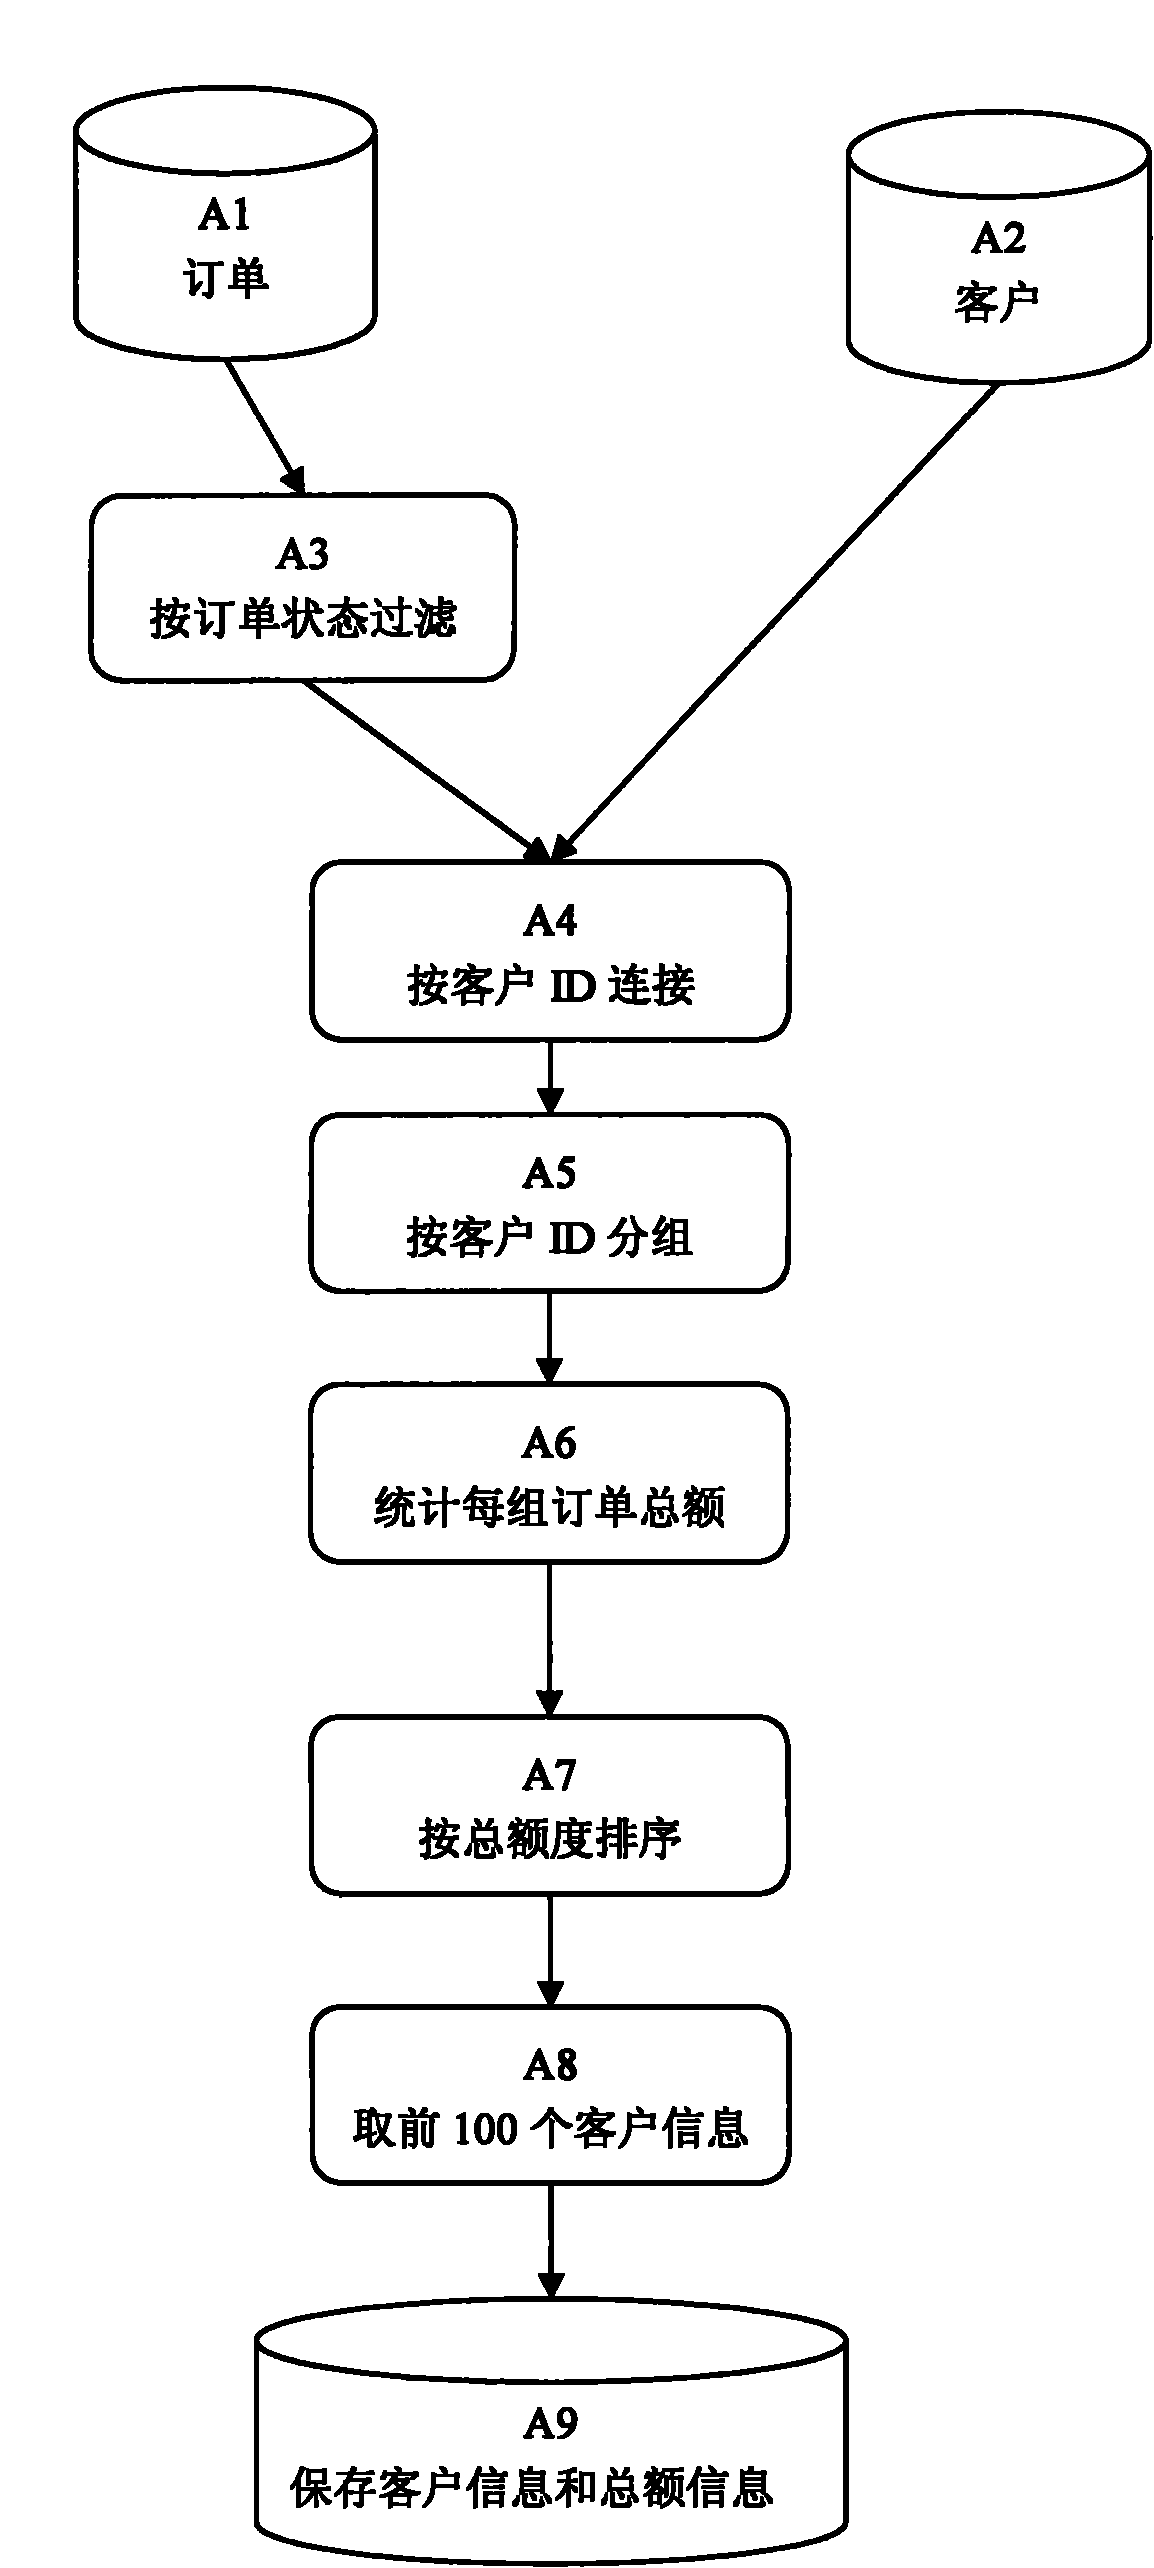 Method for generating data processing flow codes